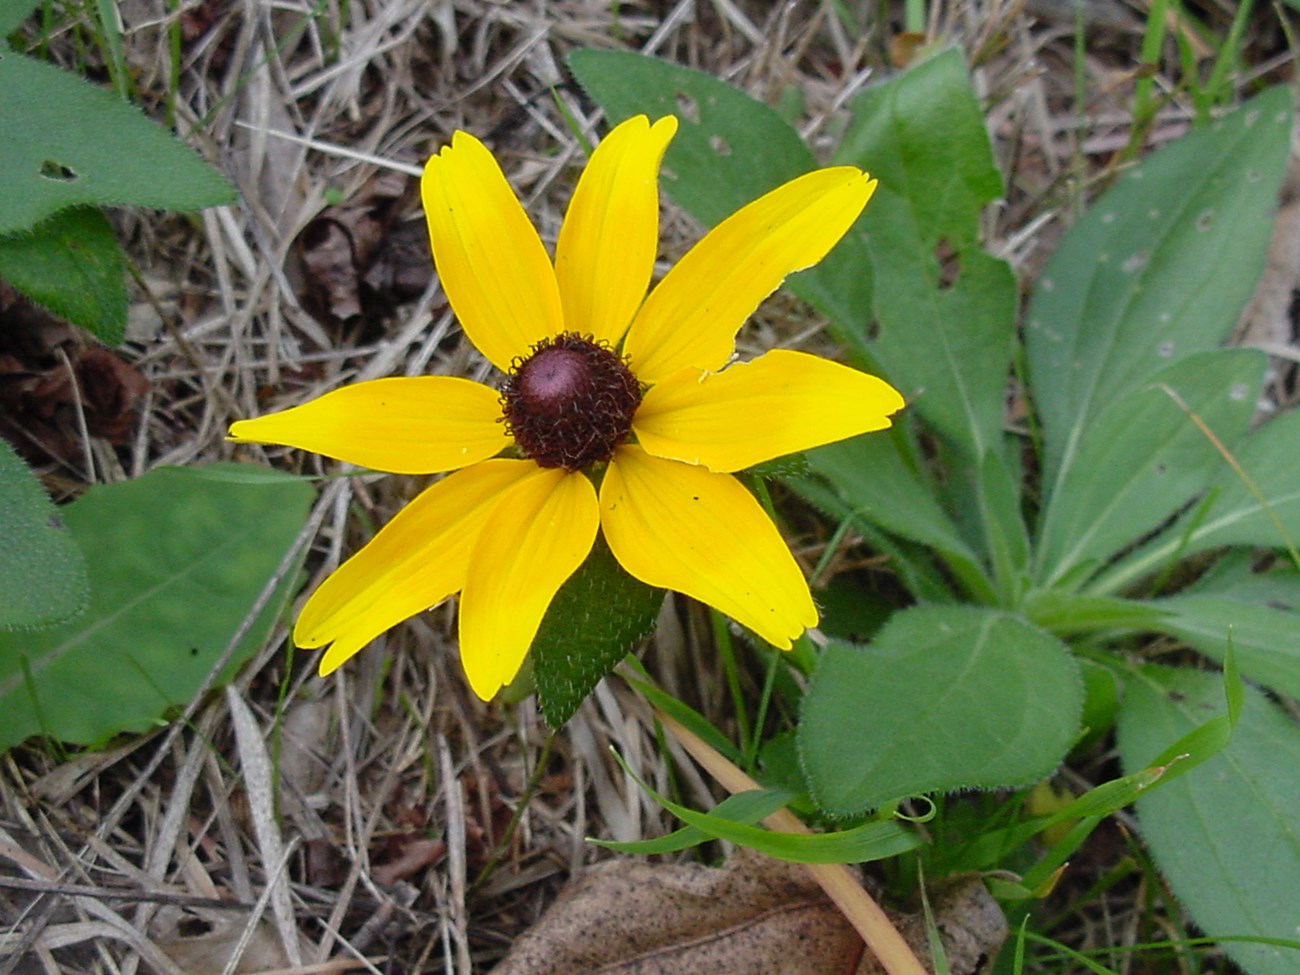 A yellow flower with 8 pedals and a brown middle